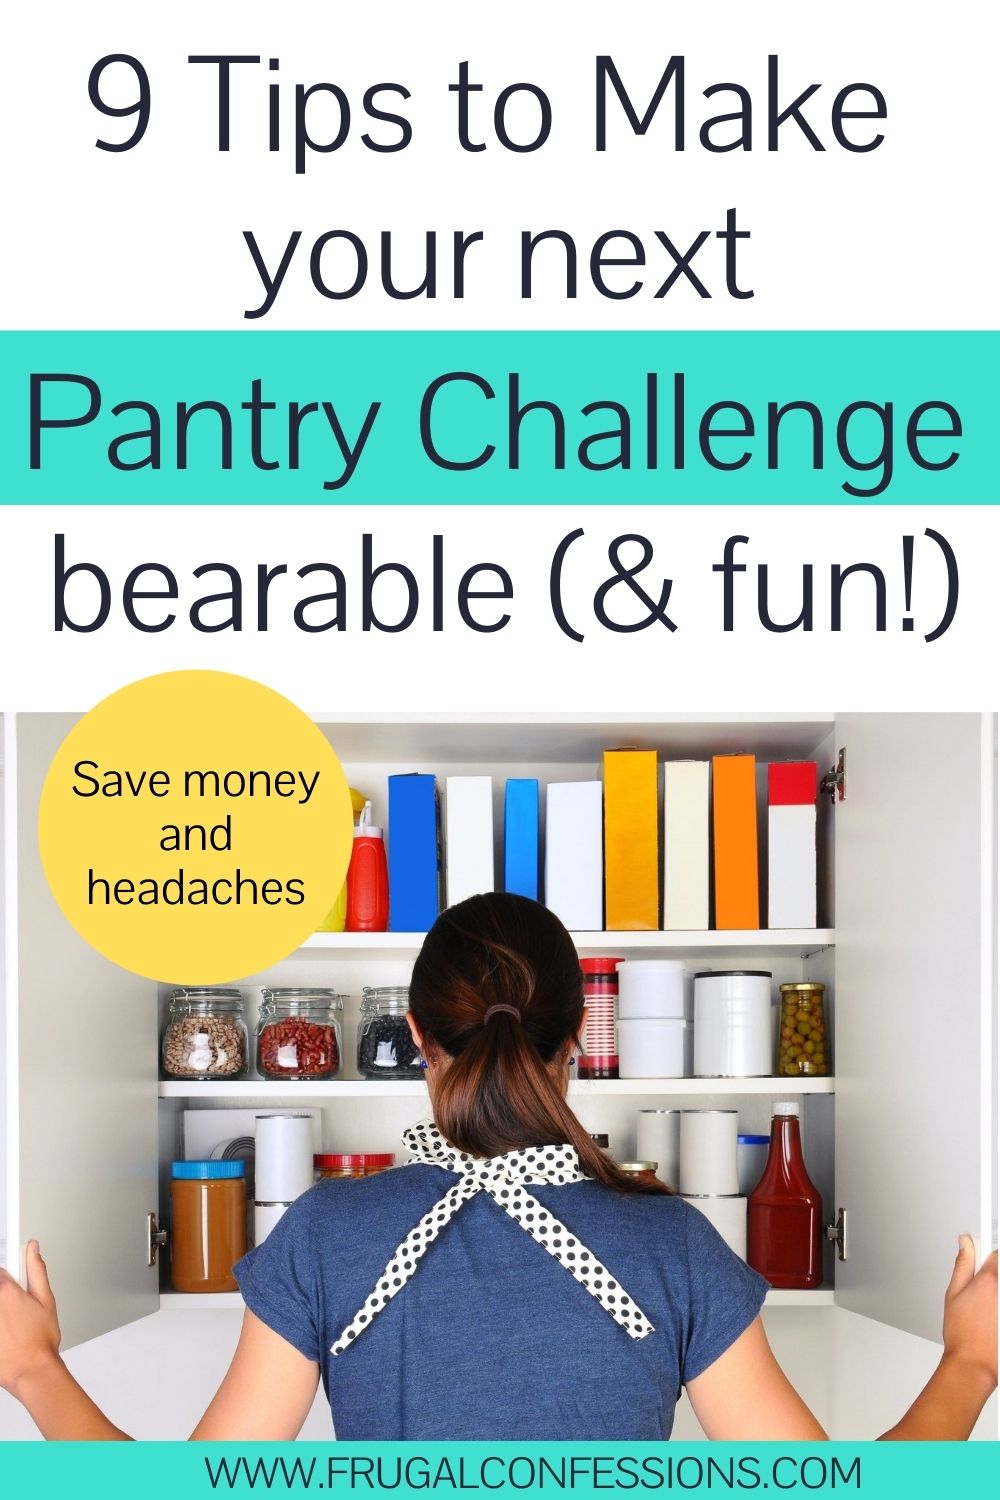 woman looking into pantry for meal ideas, text overlay "9 tips to make your next pantry challenge bearable and fun"